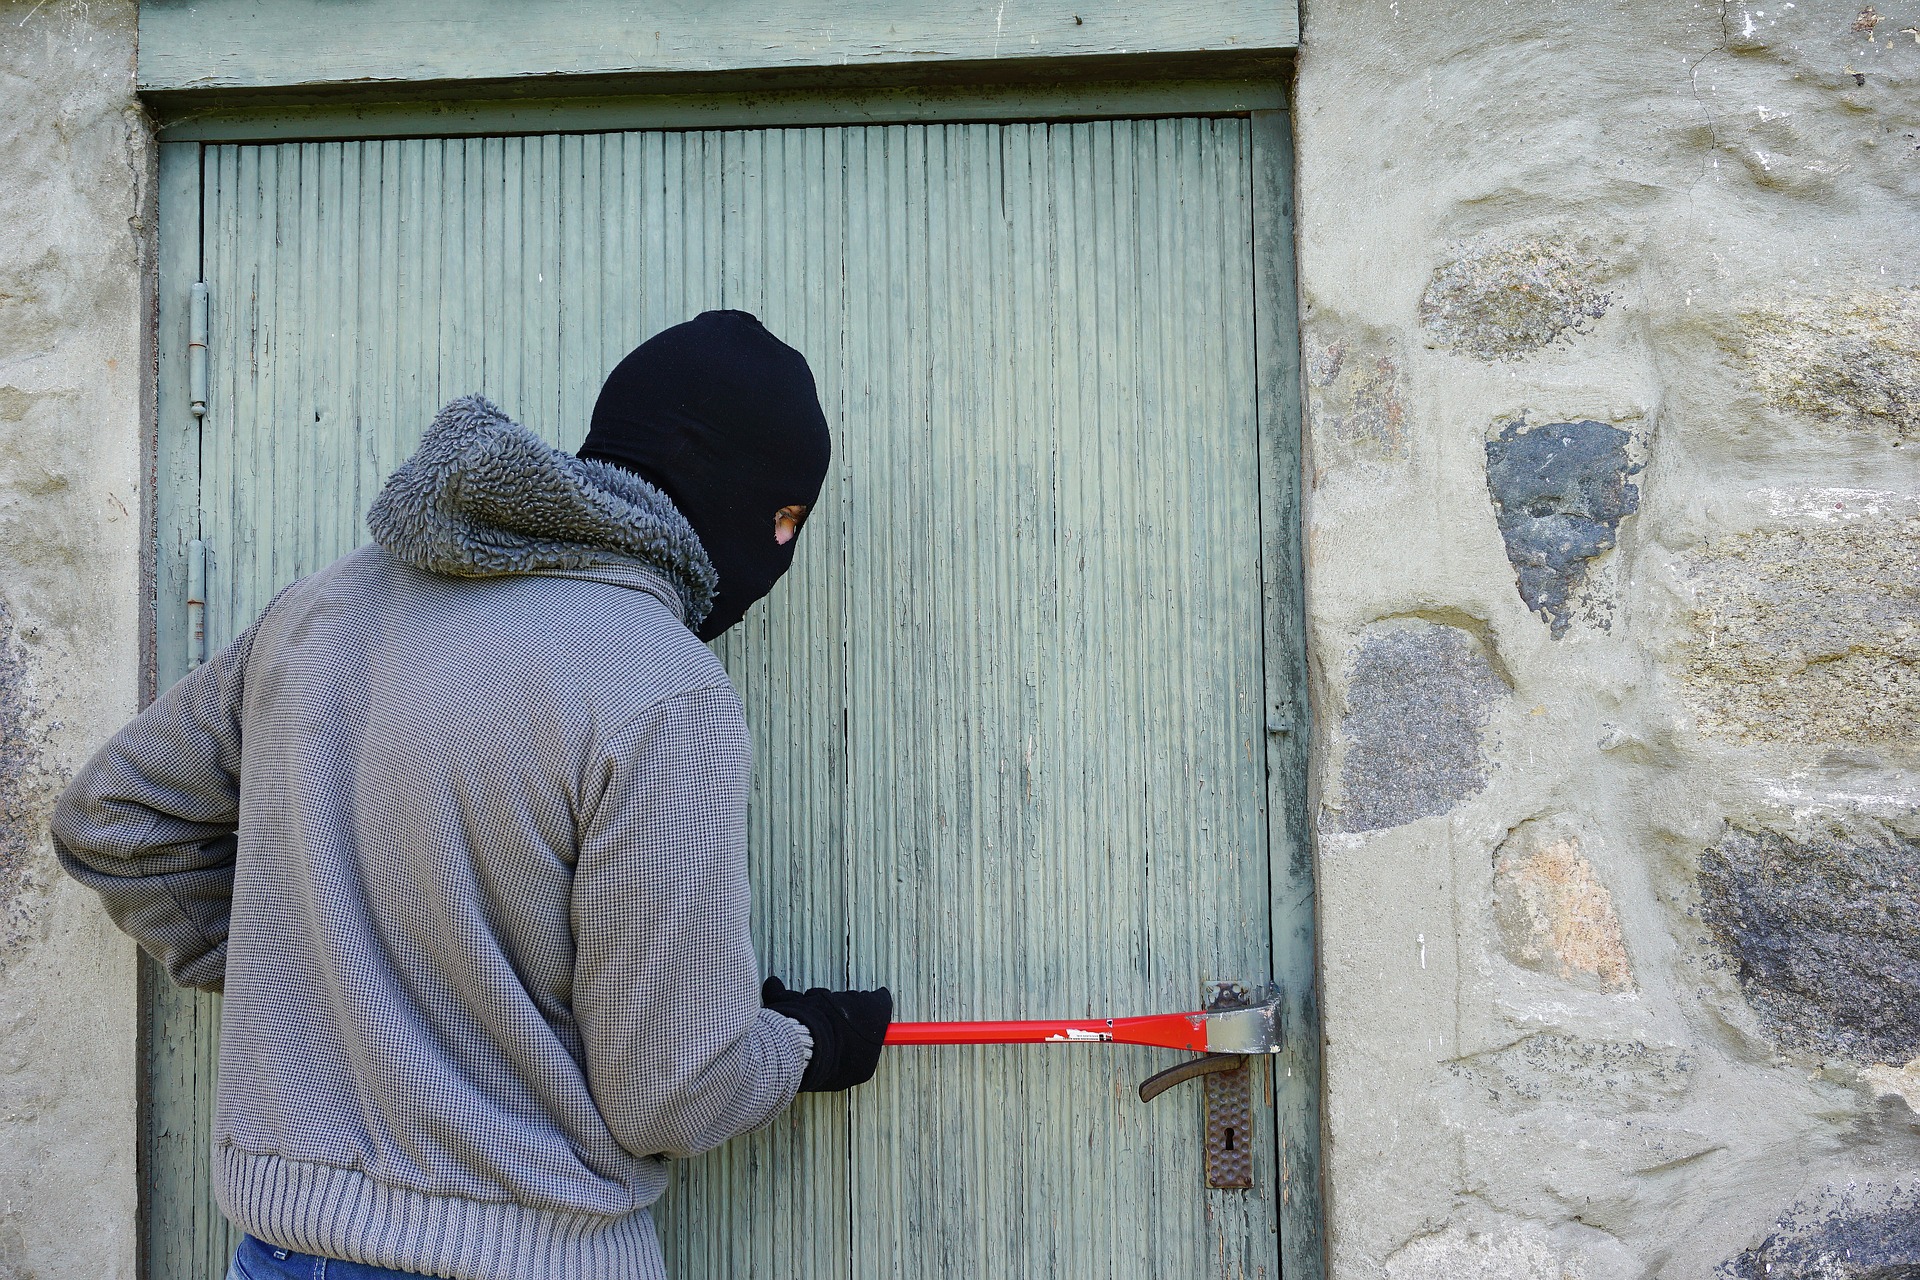 Protect Yourself: equipment theft and what you can do to prevent it